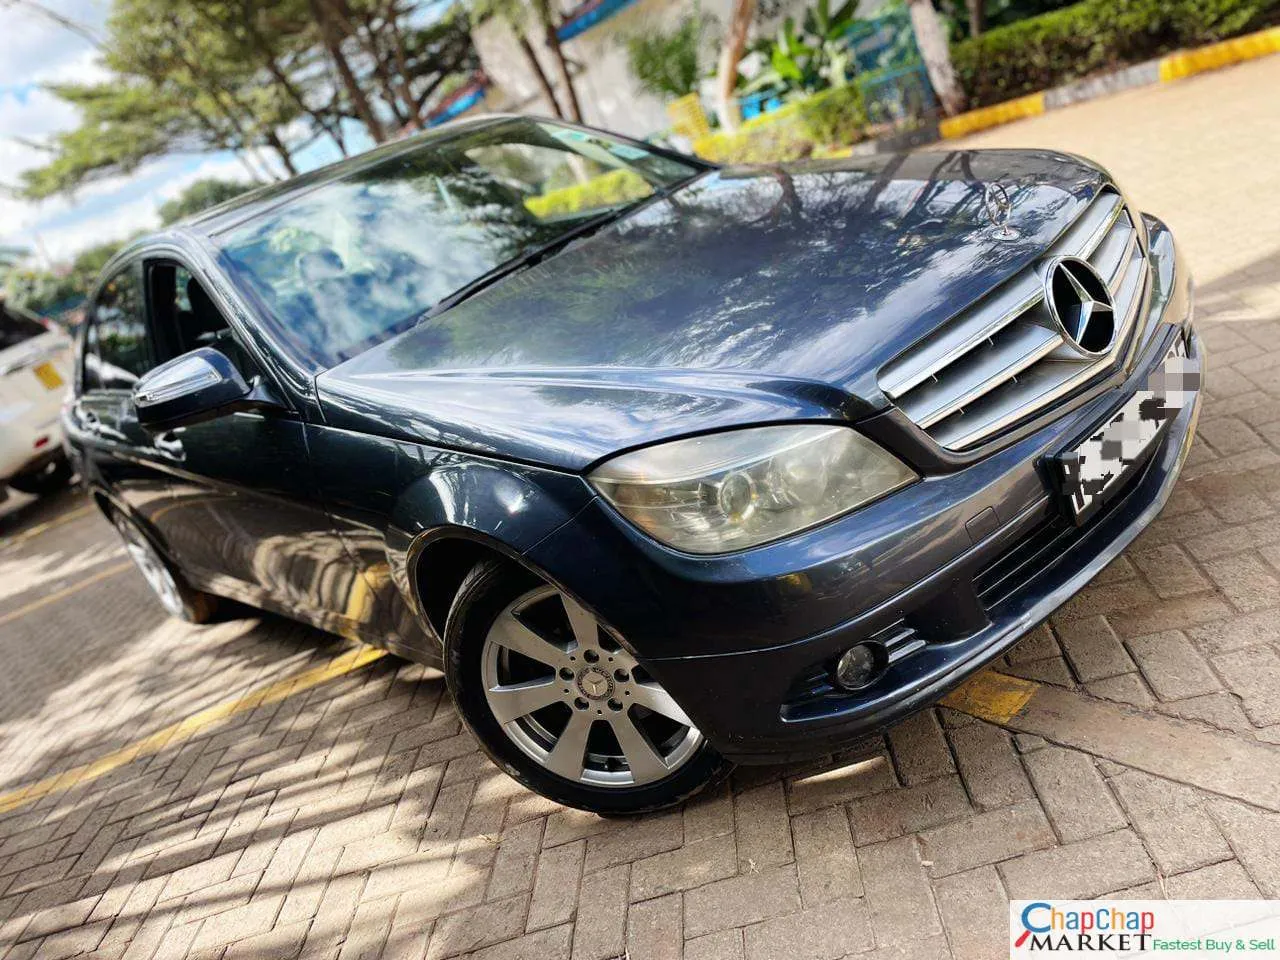 Mercedes Benz C200 DT DOBIE 🔥 You Pay 30% DEPOSIT Trade in OK EXCLUSIVE hire purchase installments